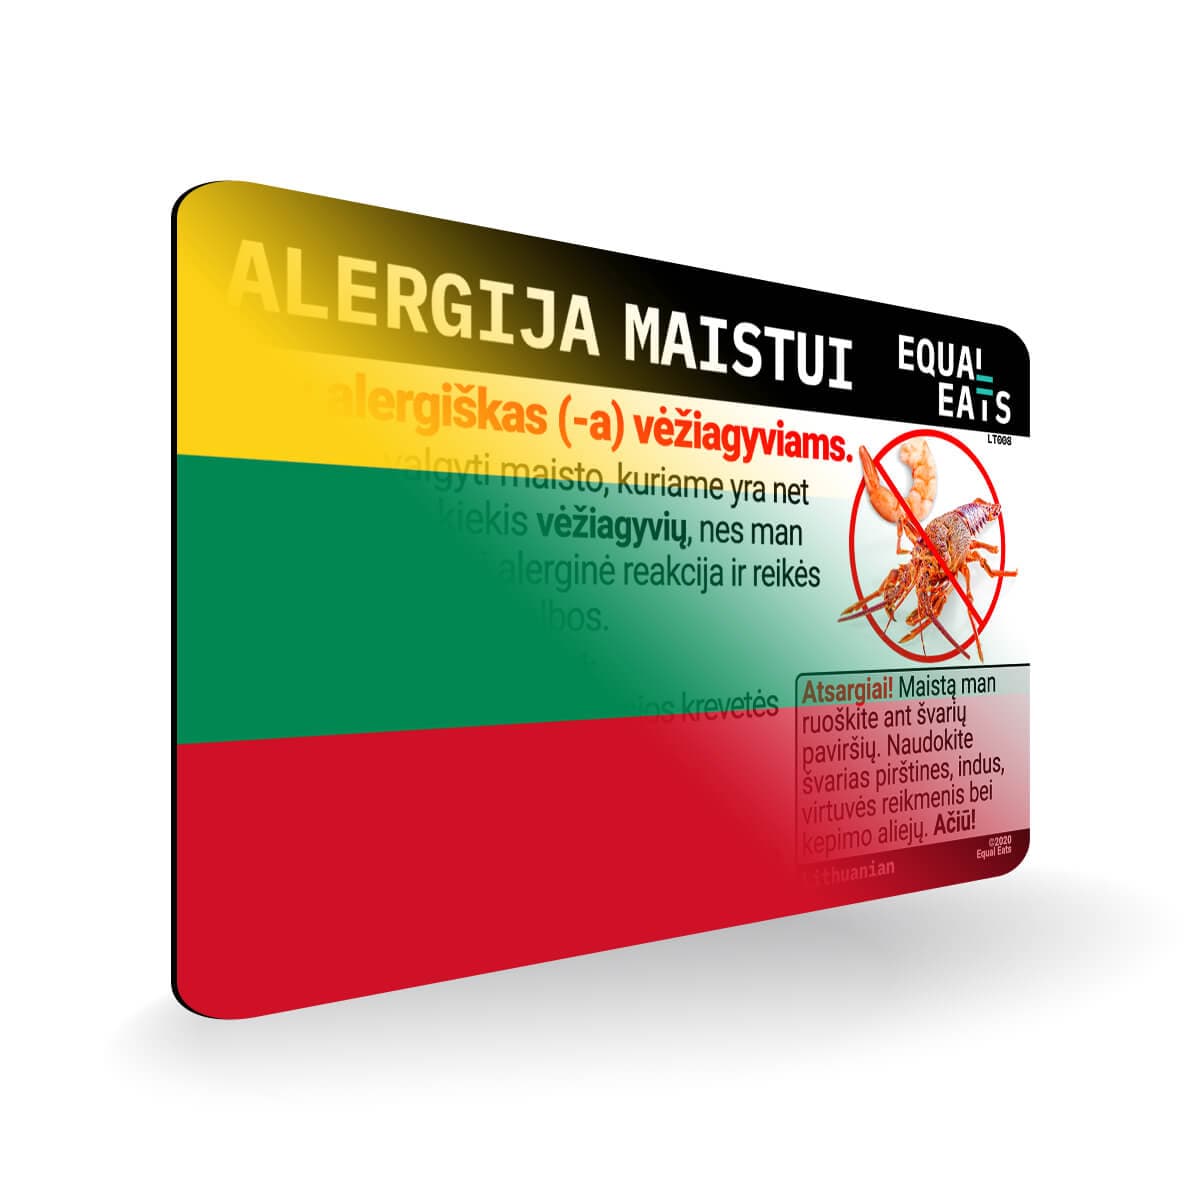 Crustacean Allergy in Lithuanian. Crustacean Allergy Card for Lithuania